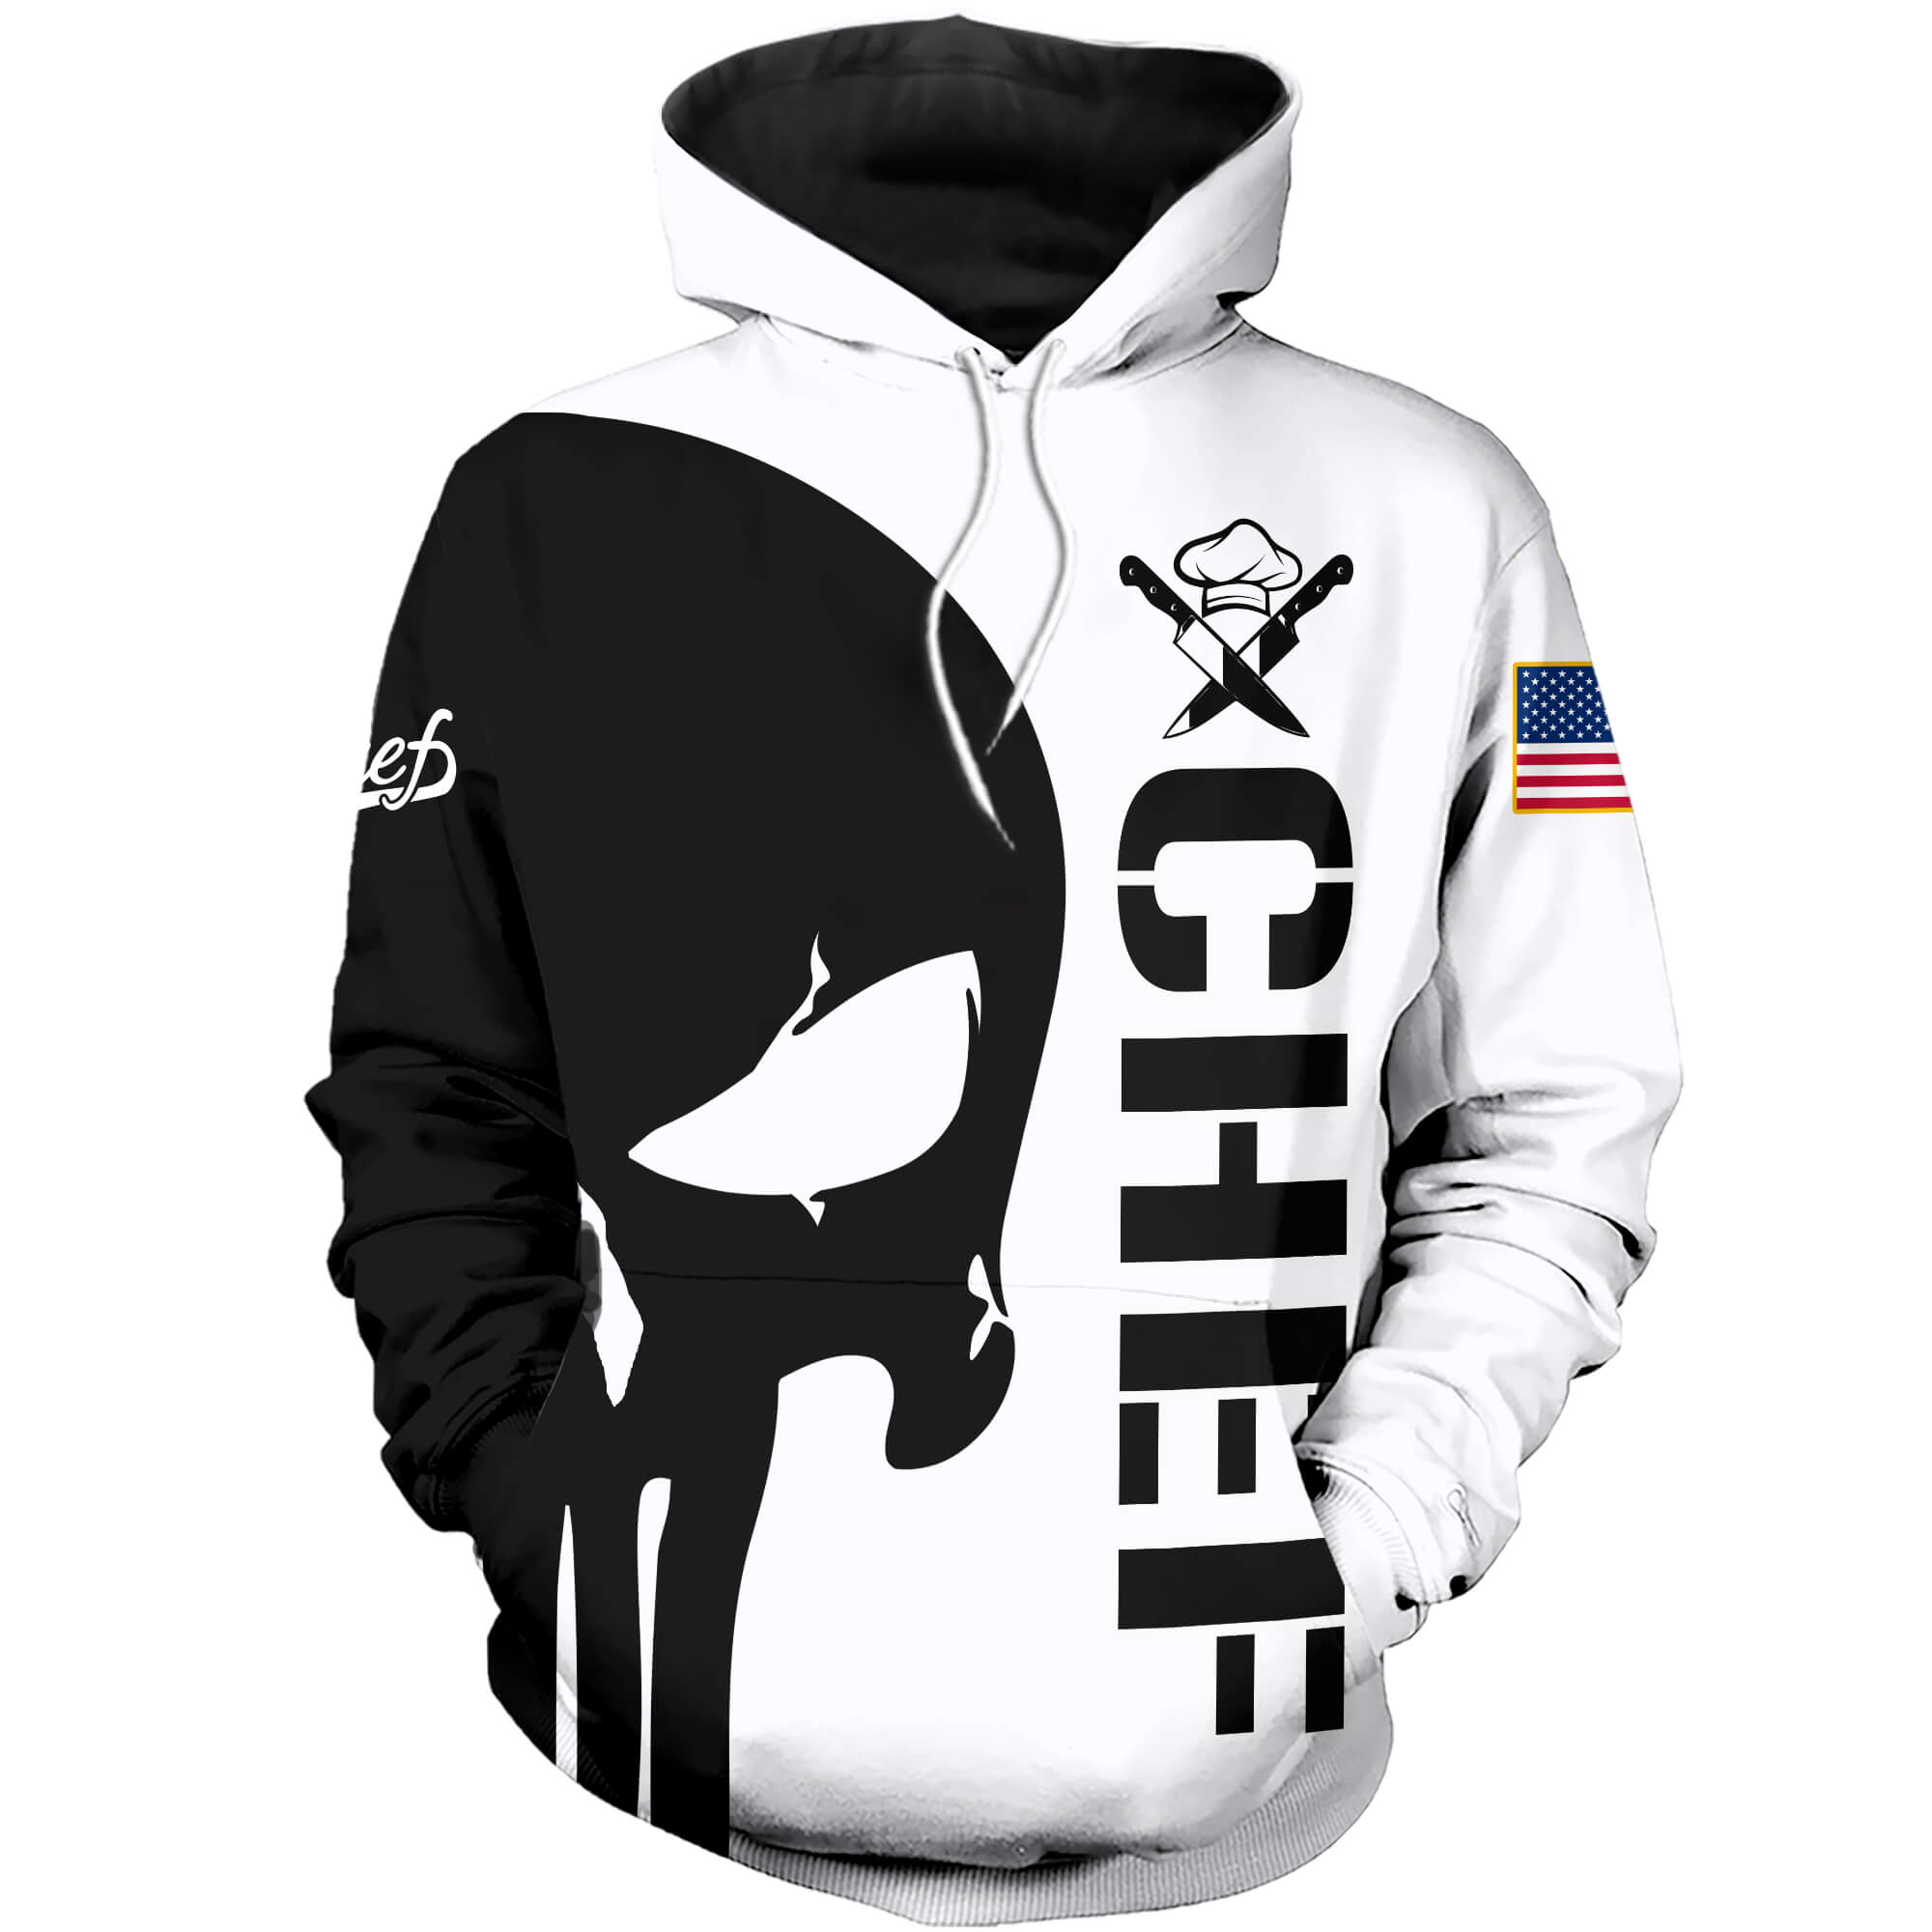 Chef Punisher Skull 3D Printed Hoodie and T-shirt – Teasearch3D 180220